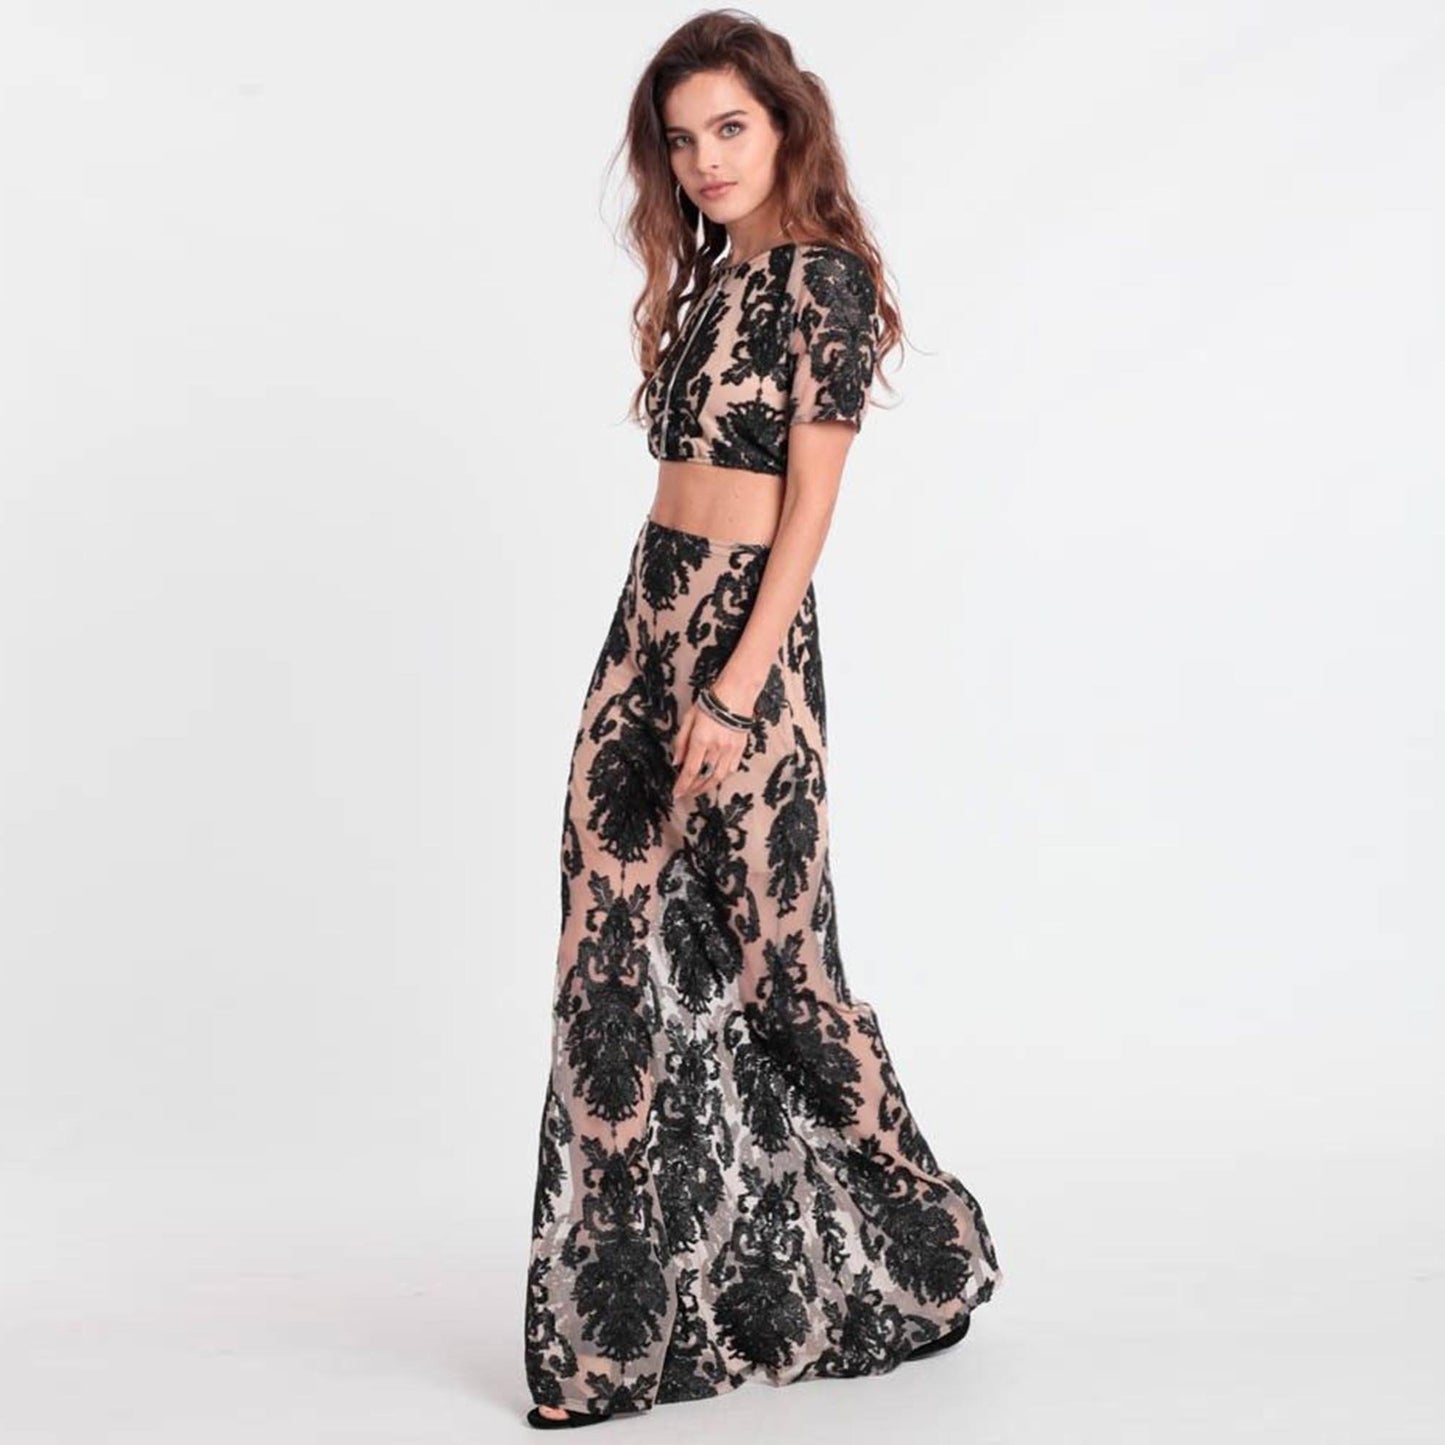 for love & lemons ethereral nude black lace maxi skirt - size large